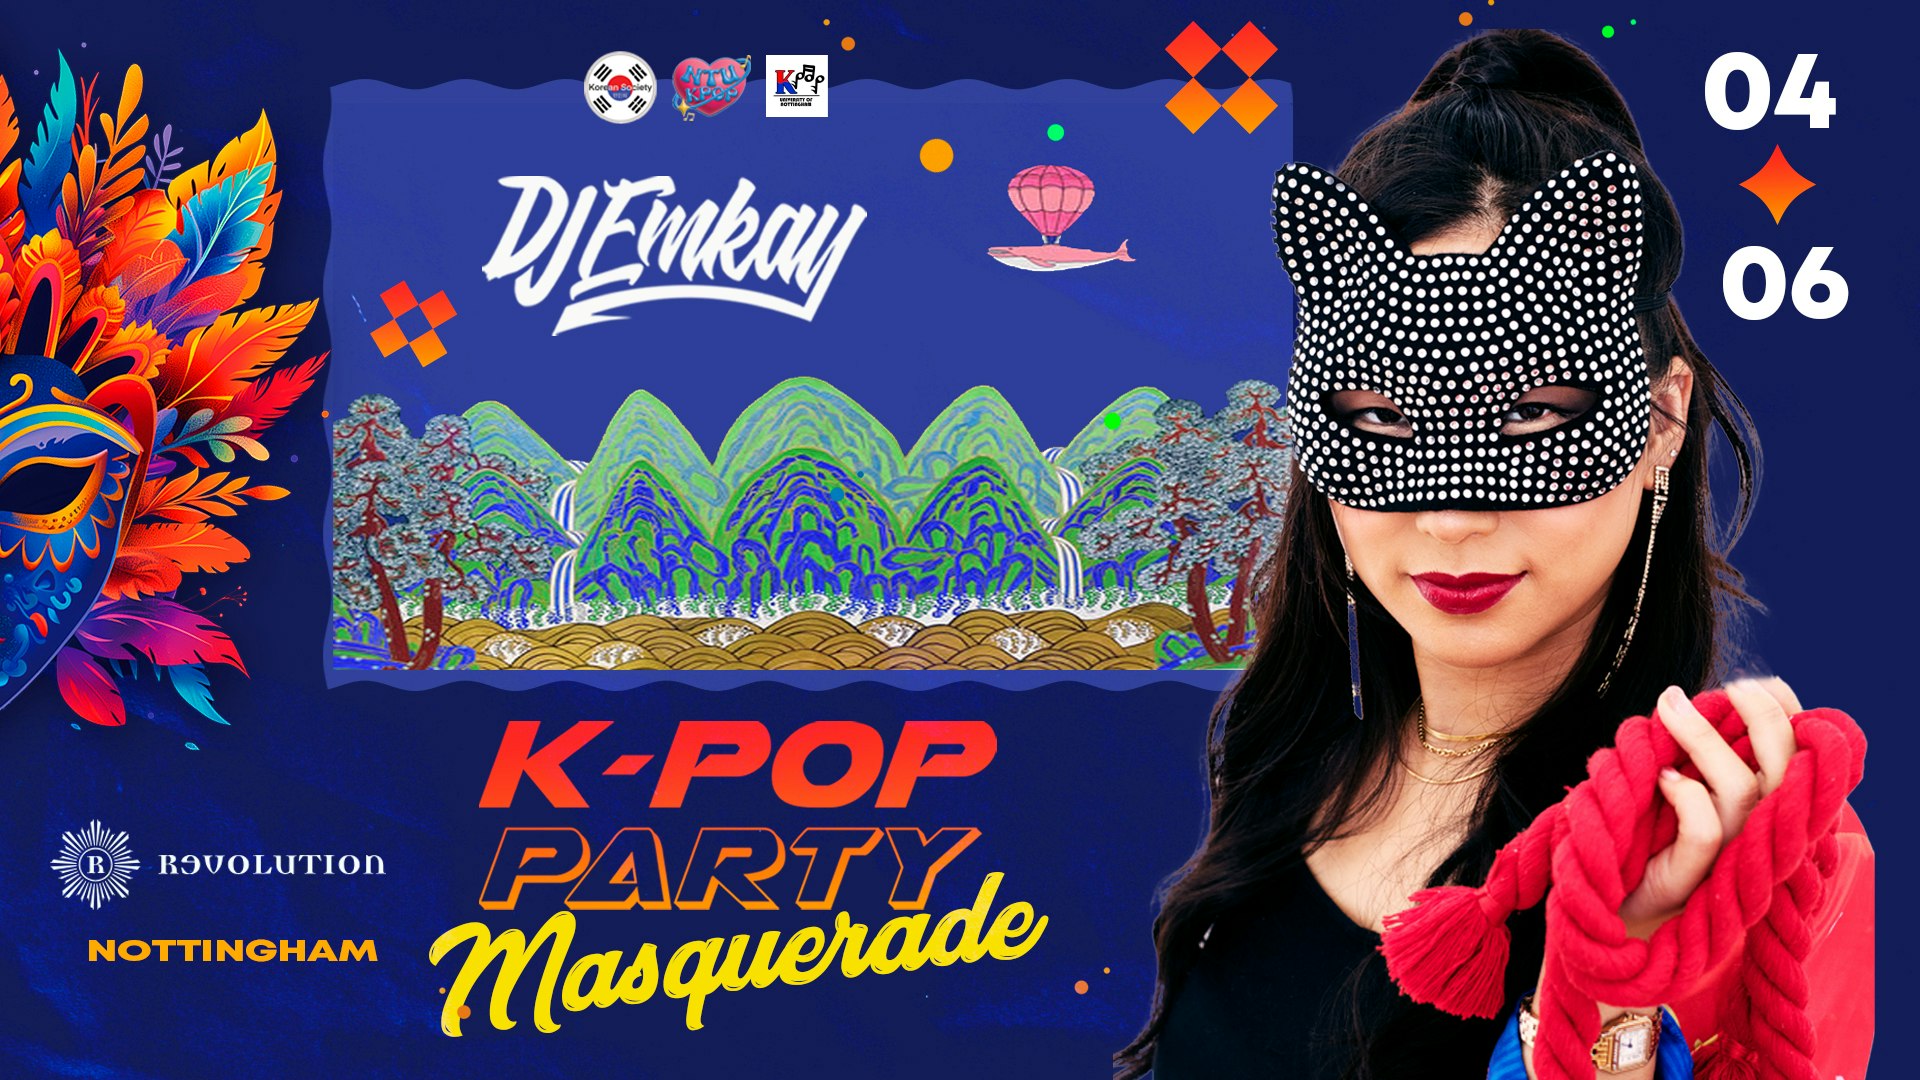 Nottingham K-Pop MASQUERADE Party  with DJ EMKAY | Tuesday 4th June